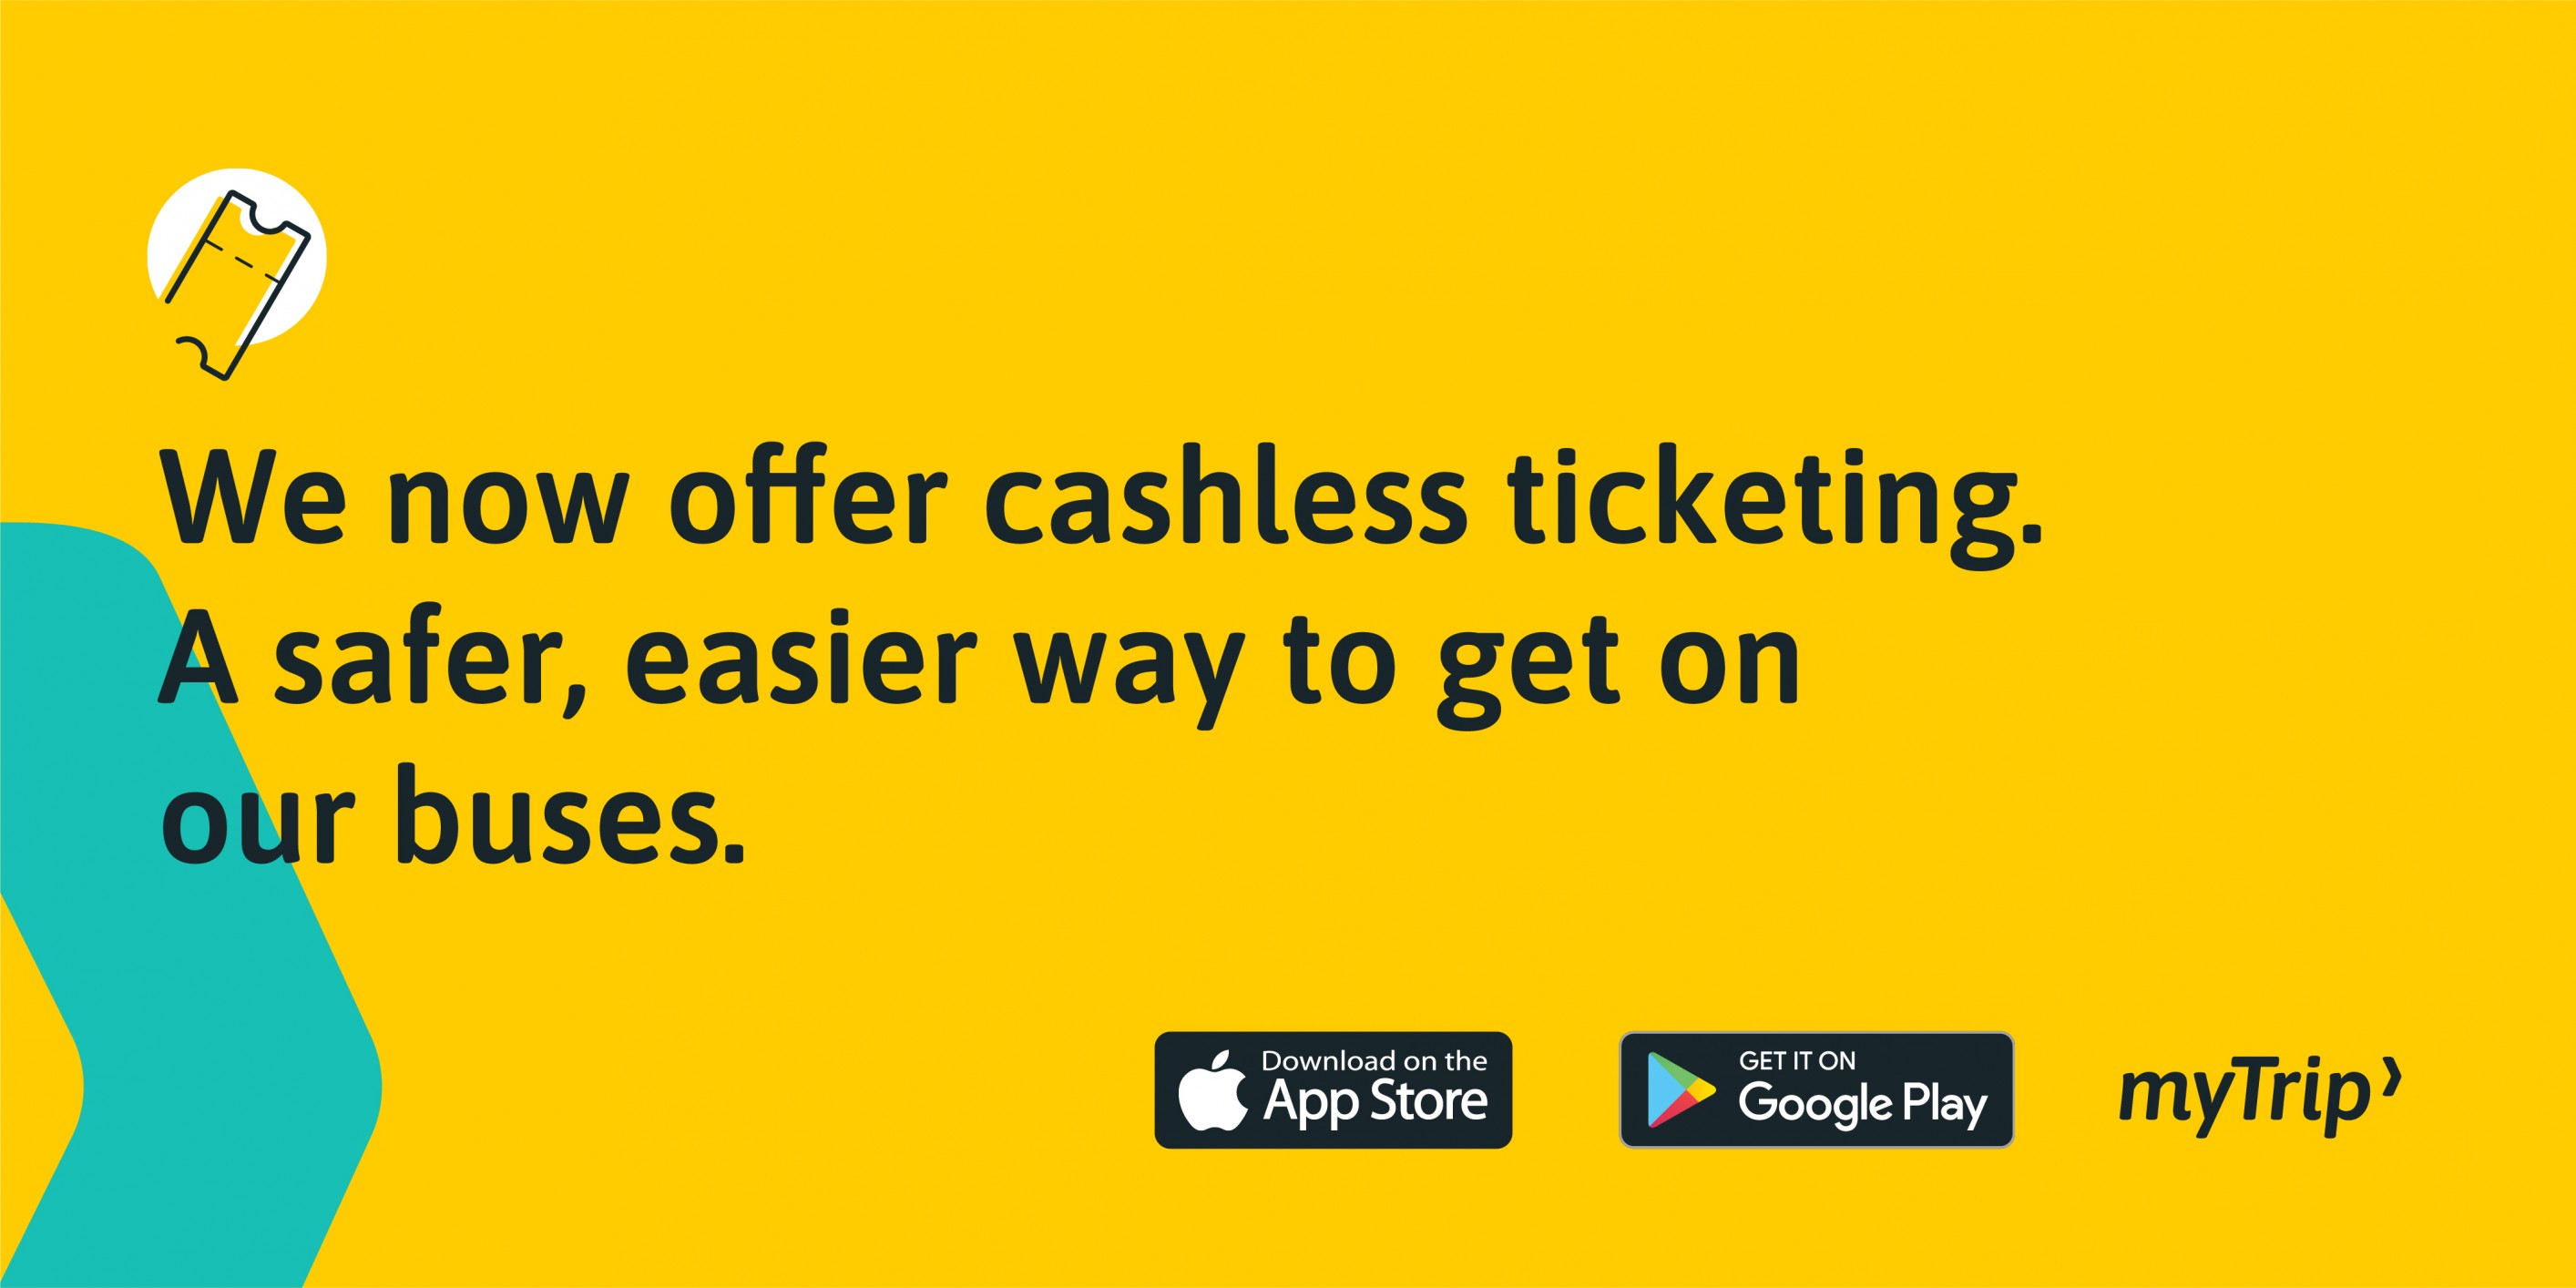 Cashless ticketing with myTrip